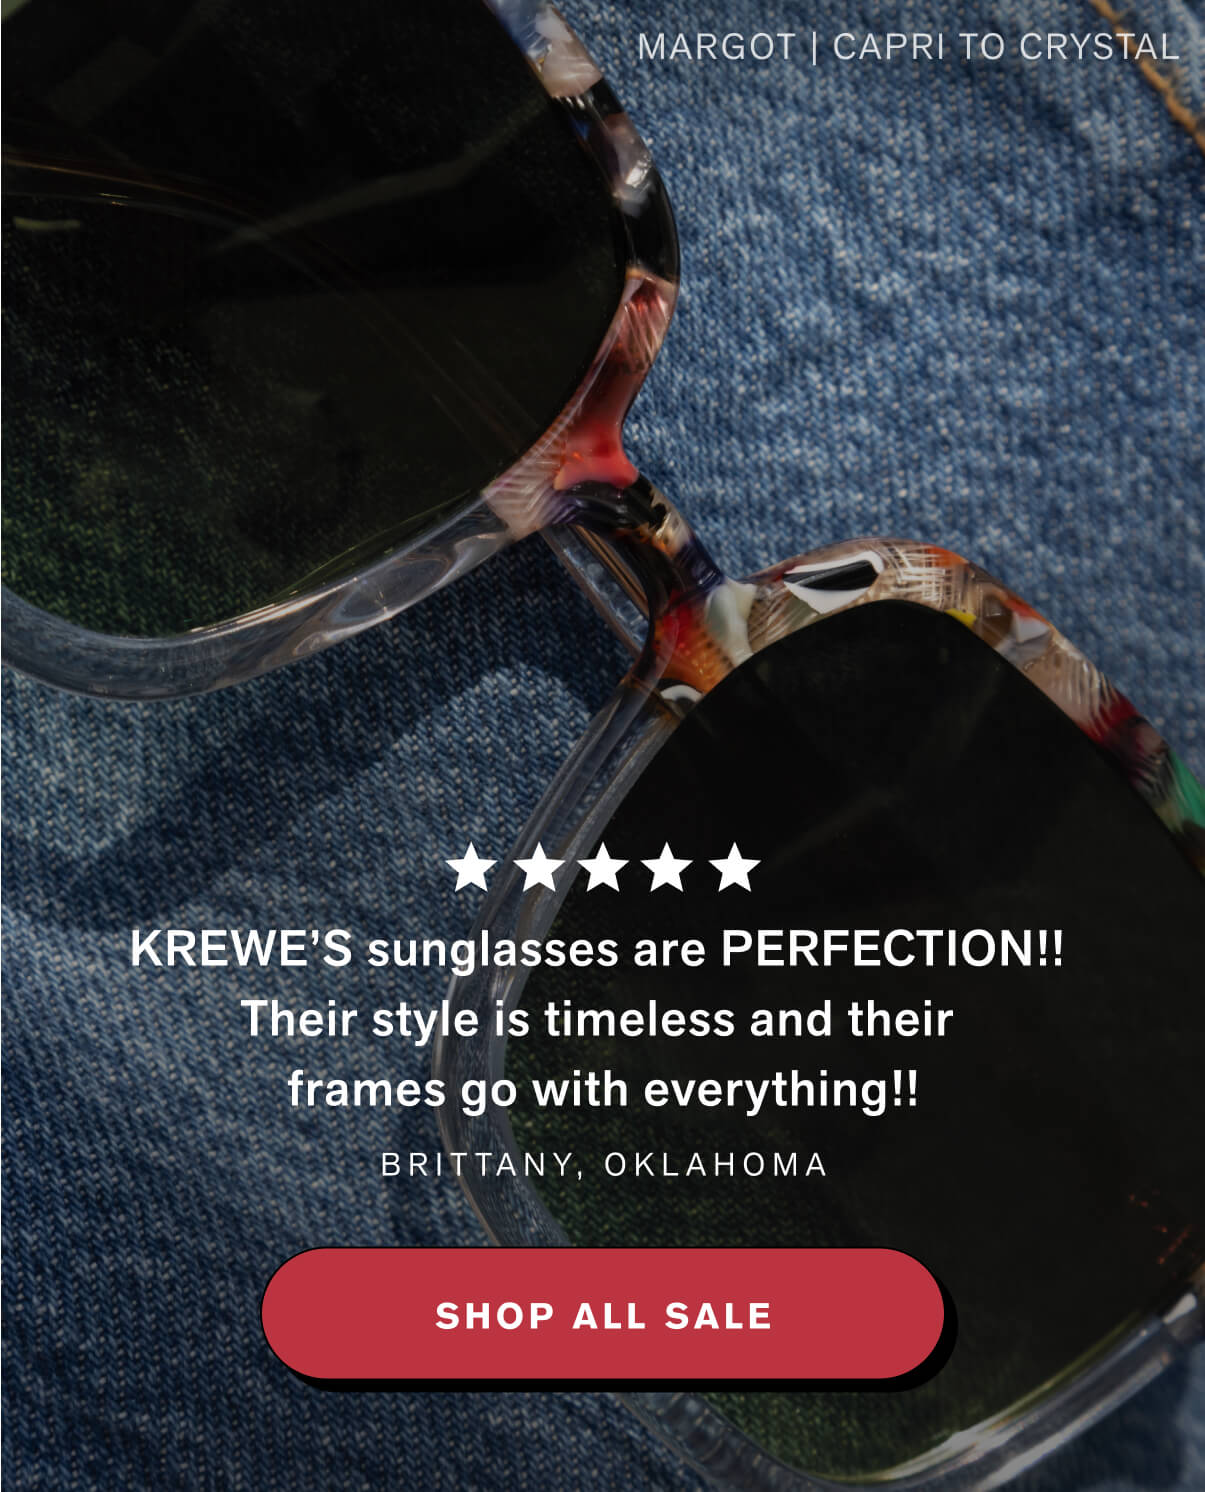 “KREWE’S sunglasses are PERFECTION!! Their style is timeless and their frames go with everything!! Brittany, OK